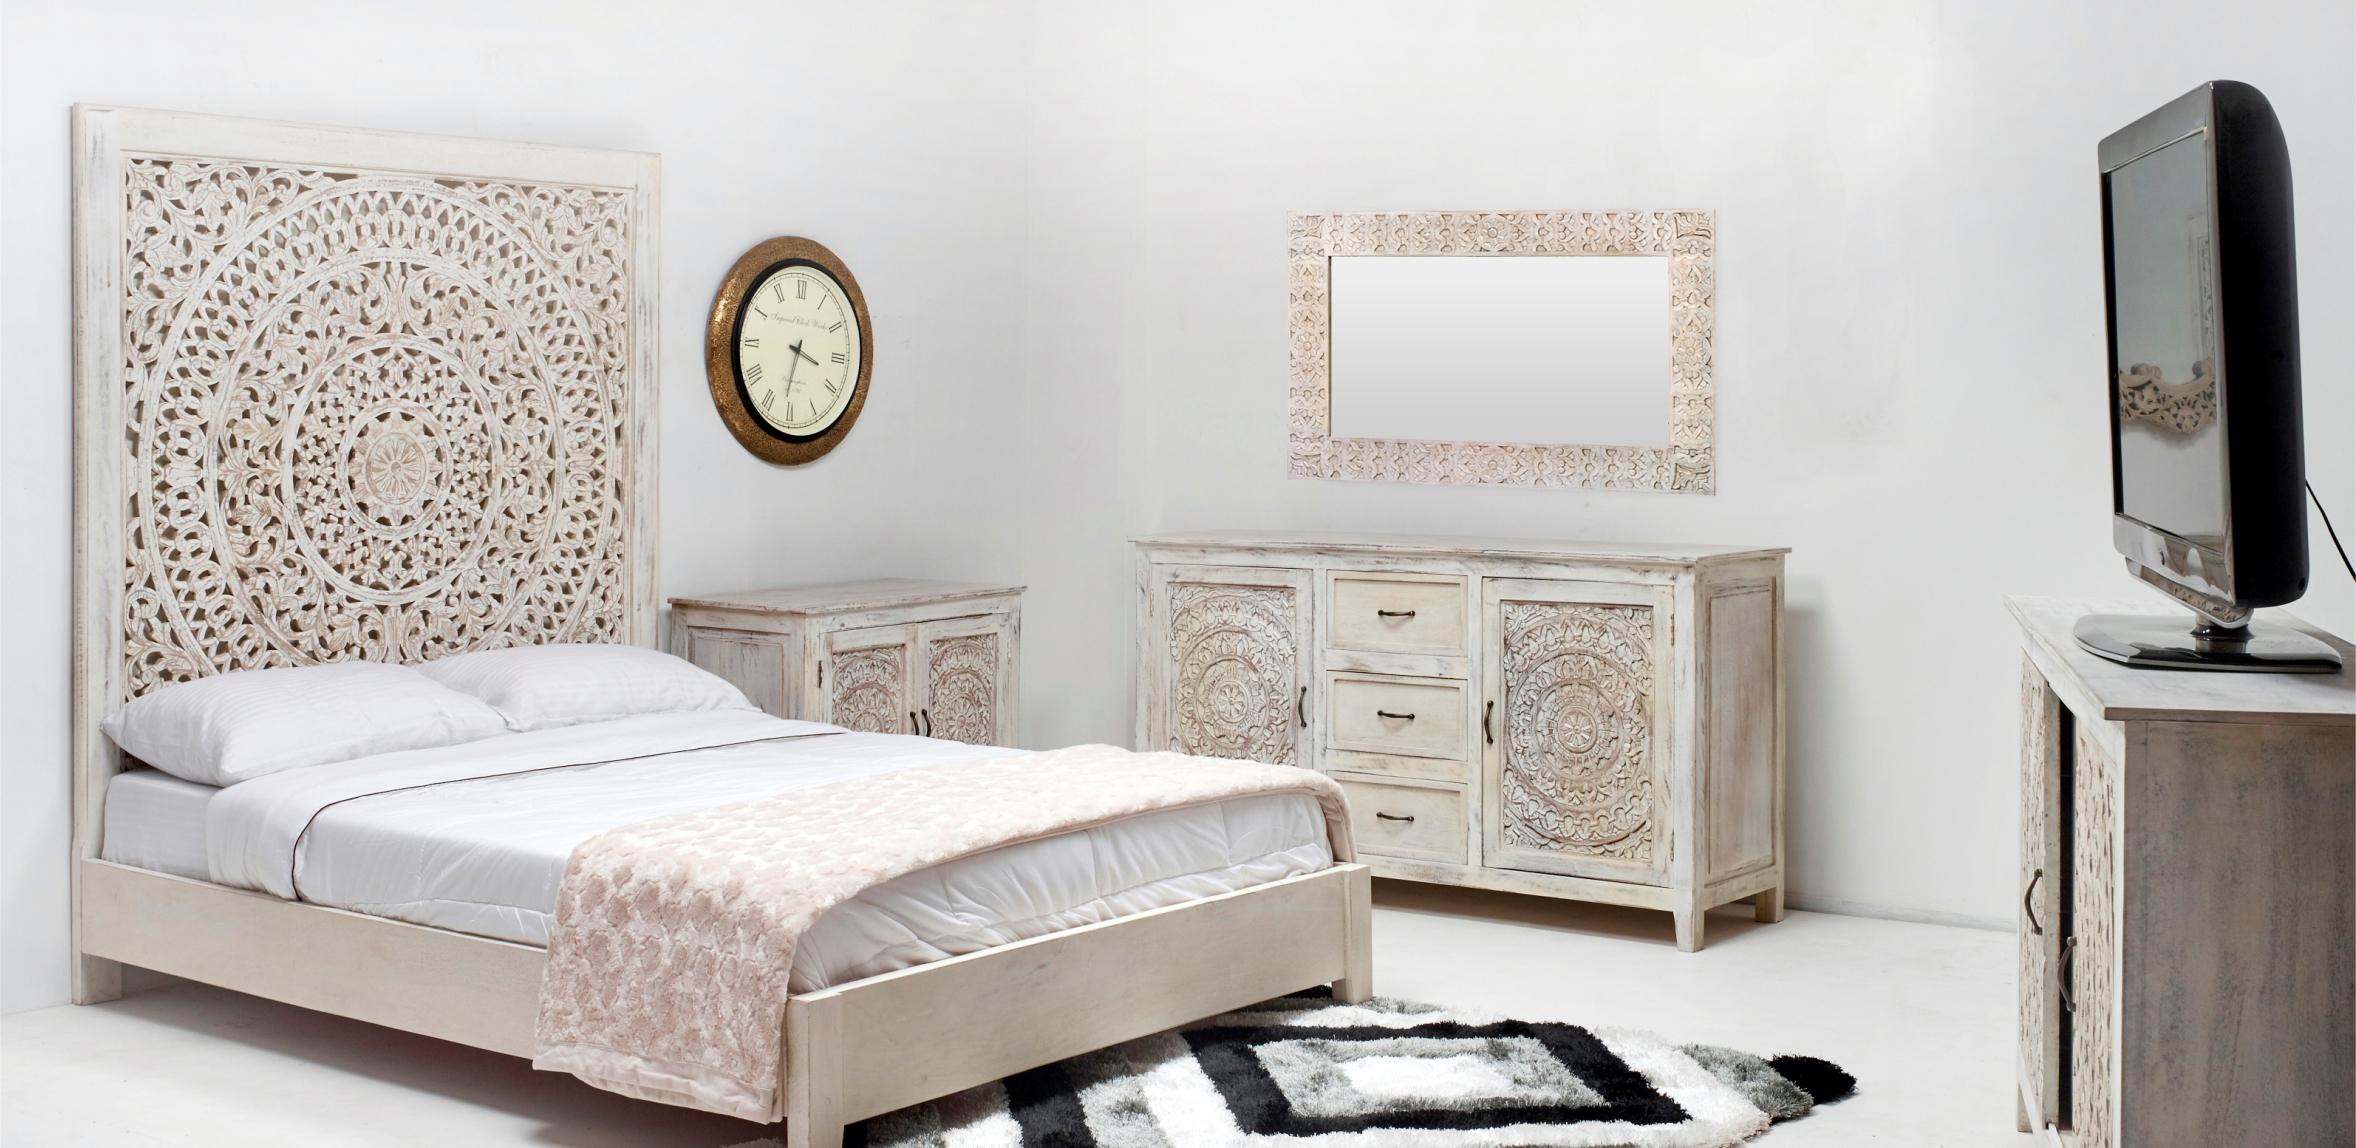 Transitional Bedroom Set UCS-6621-5PC Carved Lace UCS-6621-5PC in whitewash 